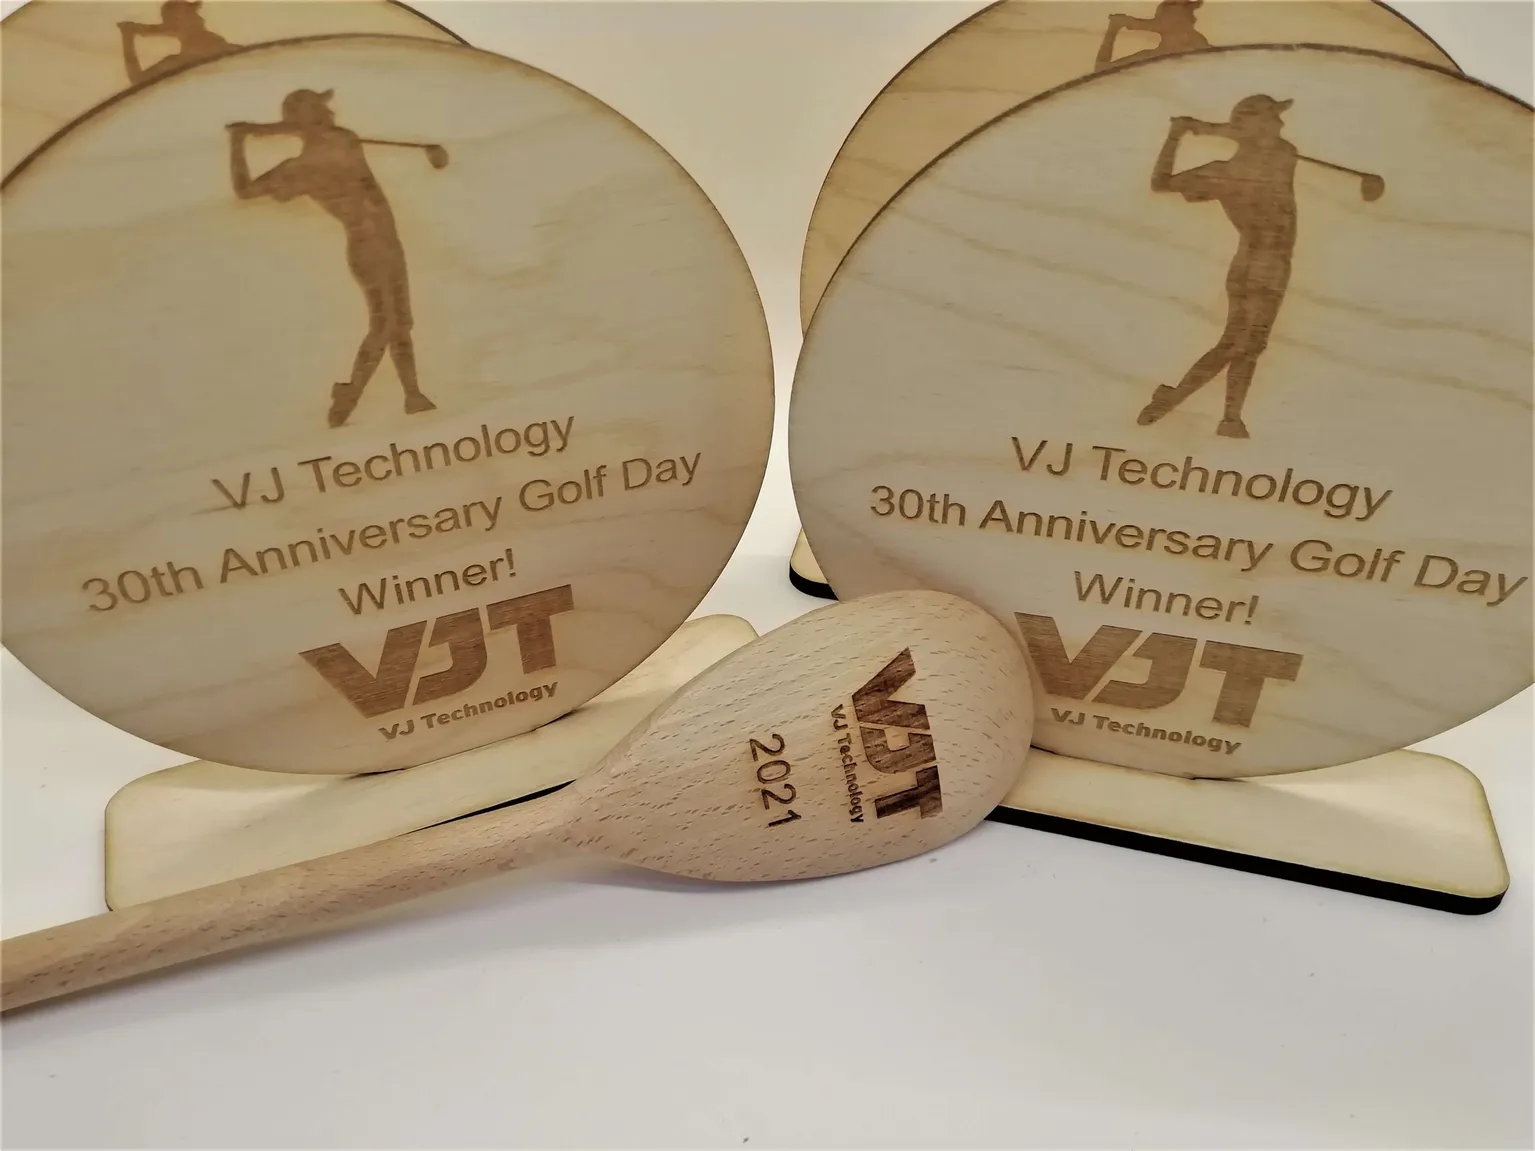 Vv technology 30th anniversary golf day sustainable trophies.